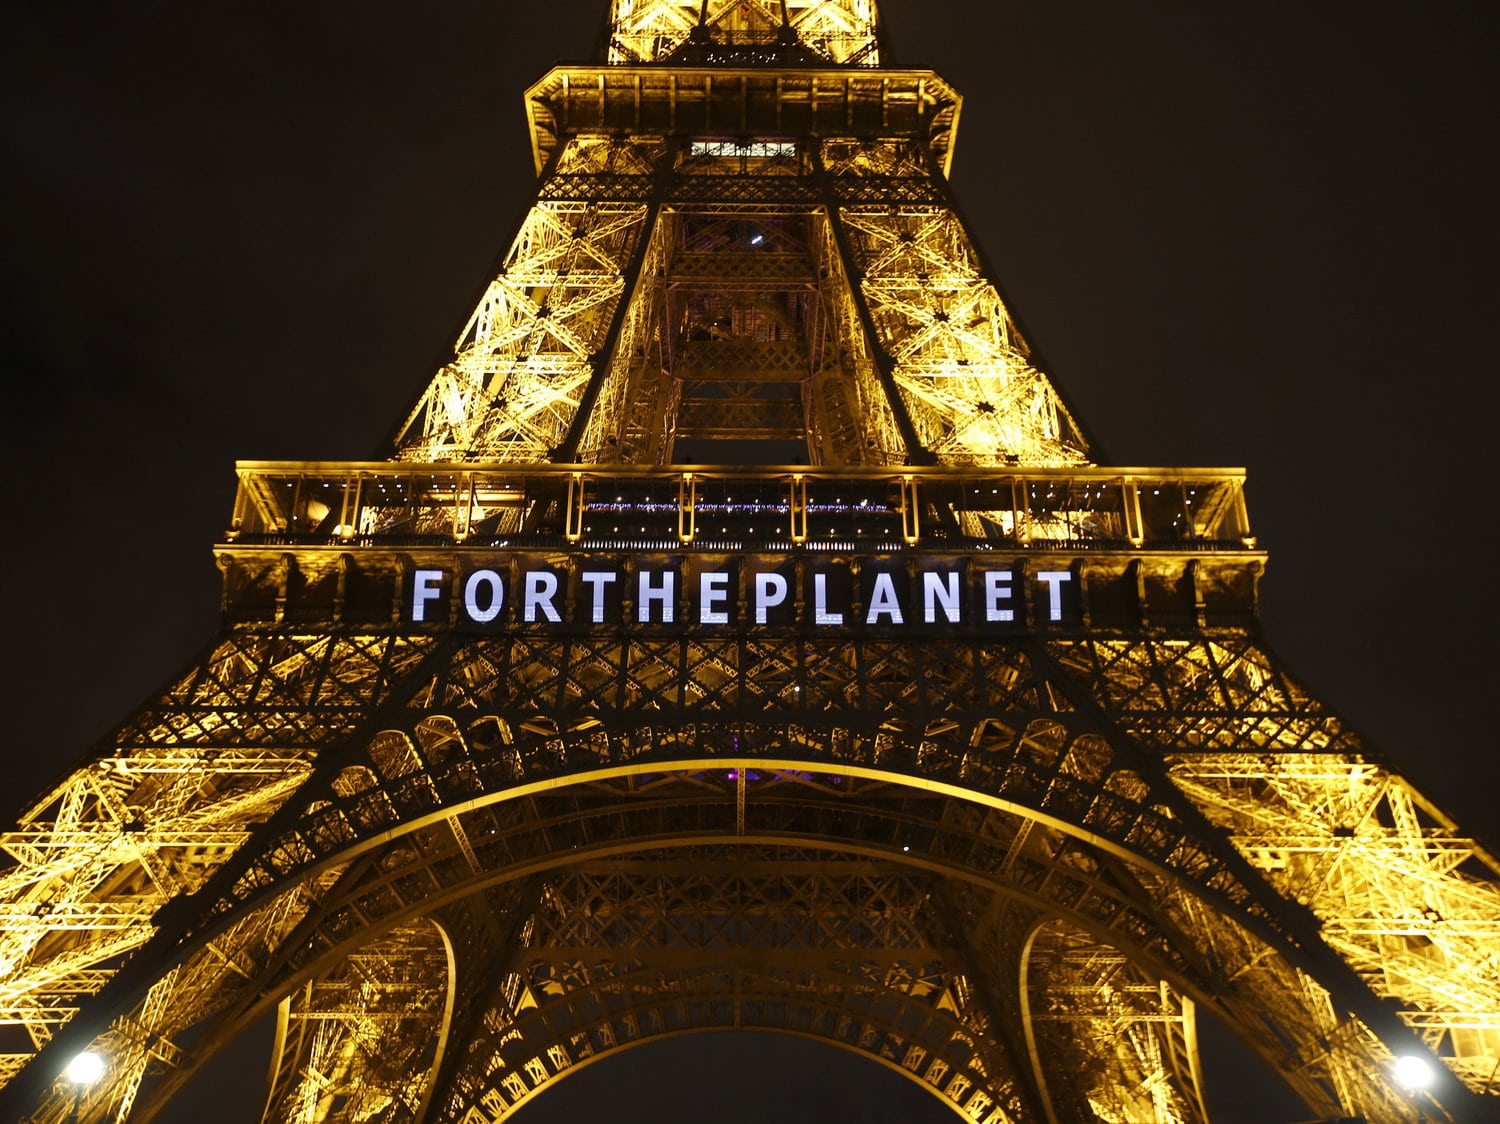 The Paris Agreement: Is it an Overly Optimistic Pledge?